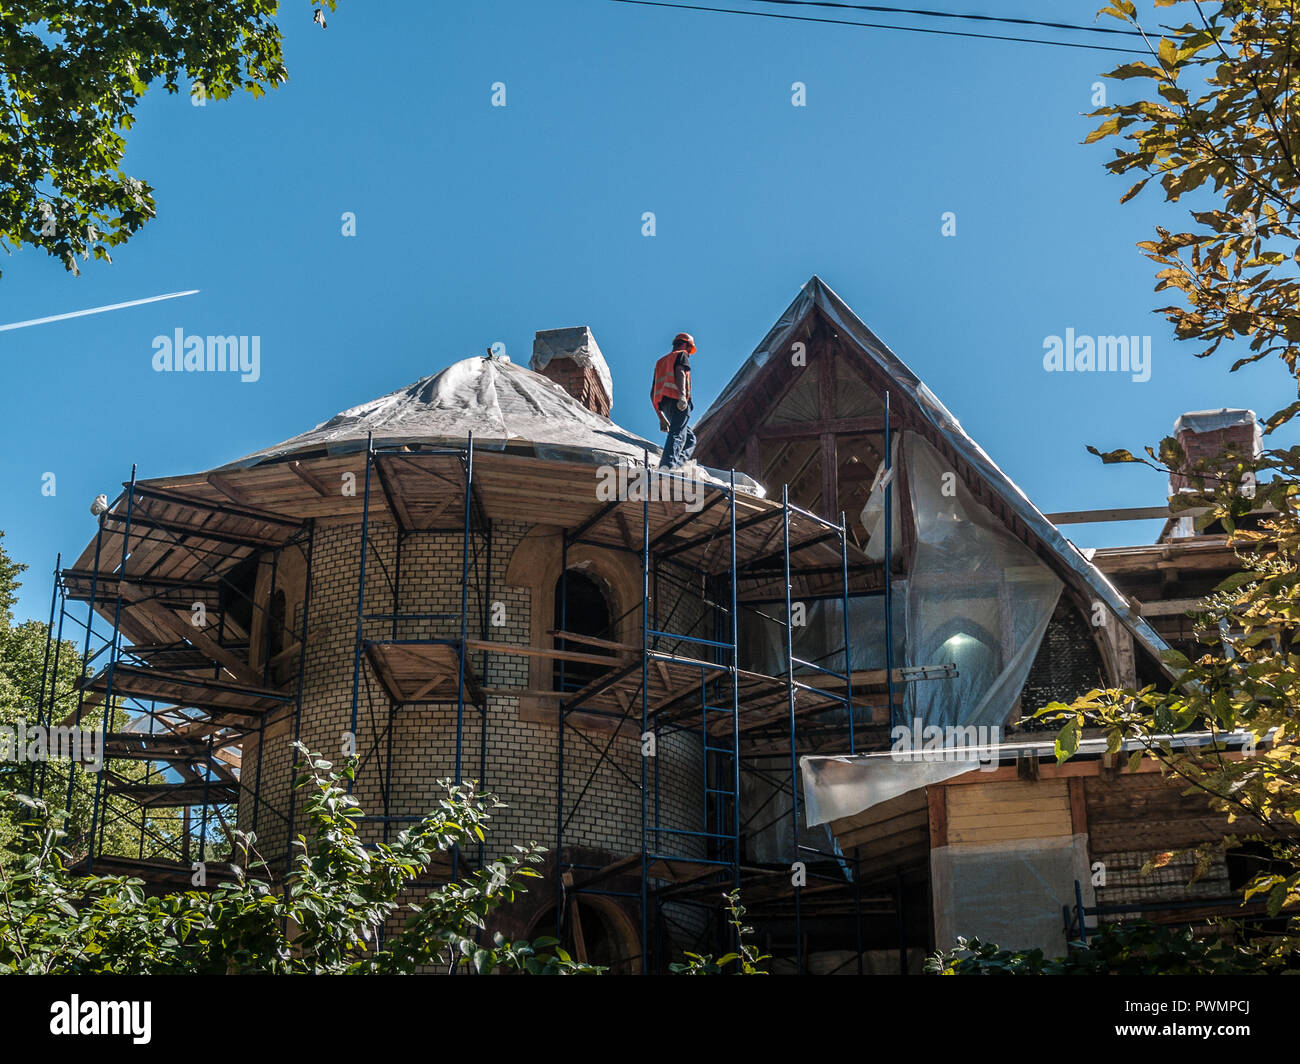 Restoration work on the historic Gauswald cottage building on Kamenny Island, Bolshaya Alley, 12-14 / 32 in St. Petersburg, Russia in the summer of 20 Stock Photo